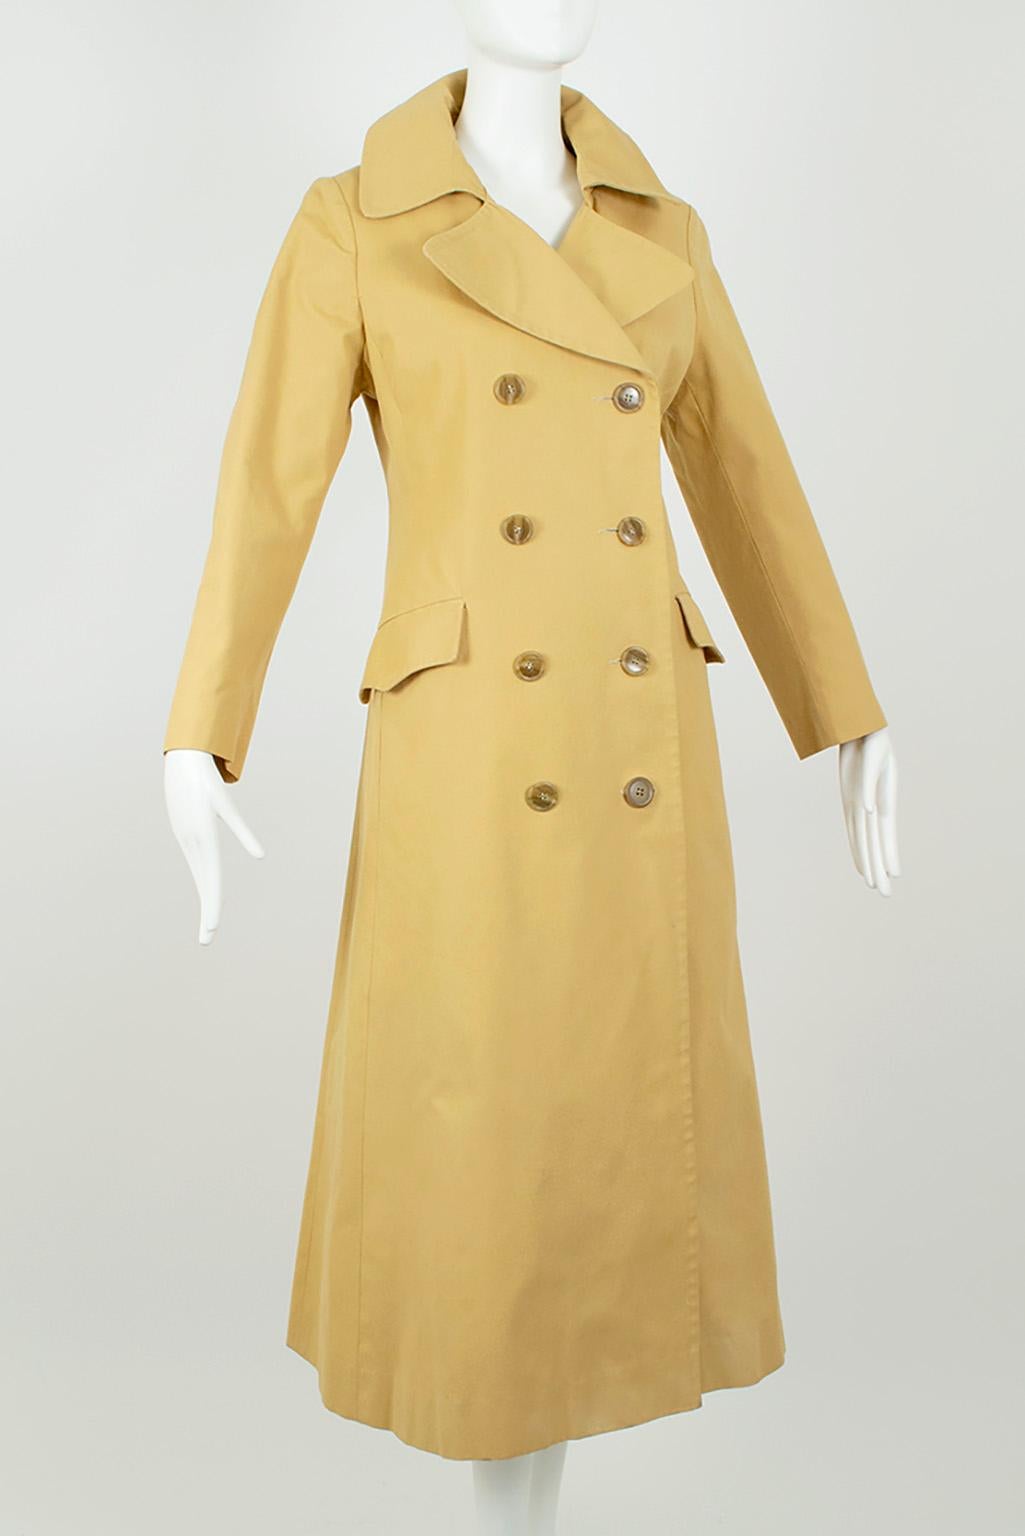 A true spy coat with drama to spare, this trench not only features a much longer, mid-calf length but also full length princess seams for a body sculpting silhouette. Its theatrical 6 ½’ skirt is offset by a close-fitting bodice for maximum movement